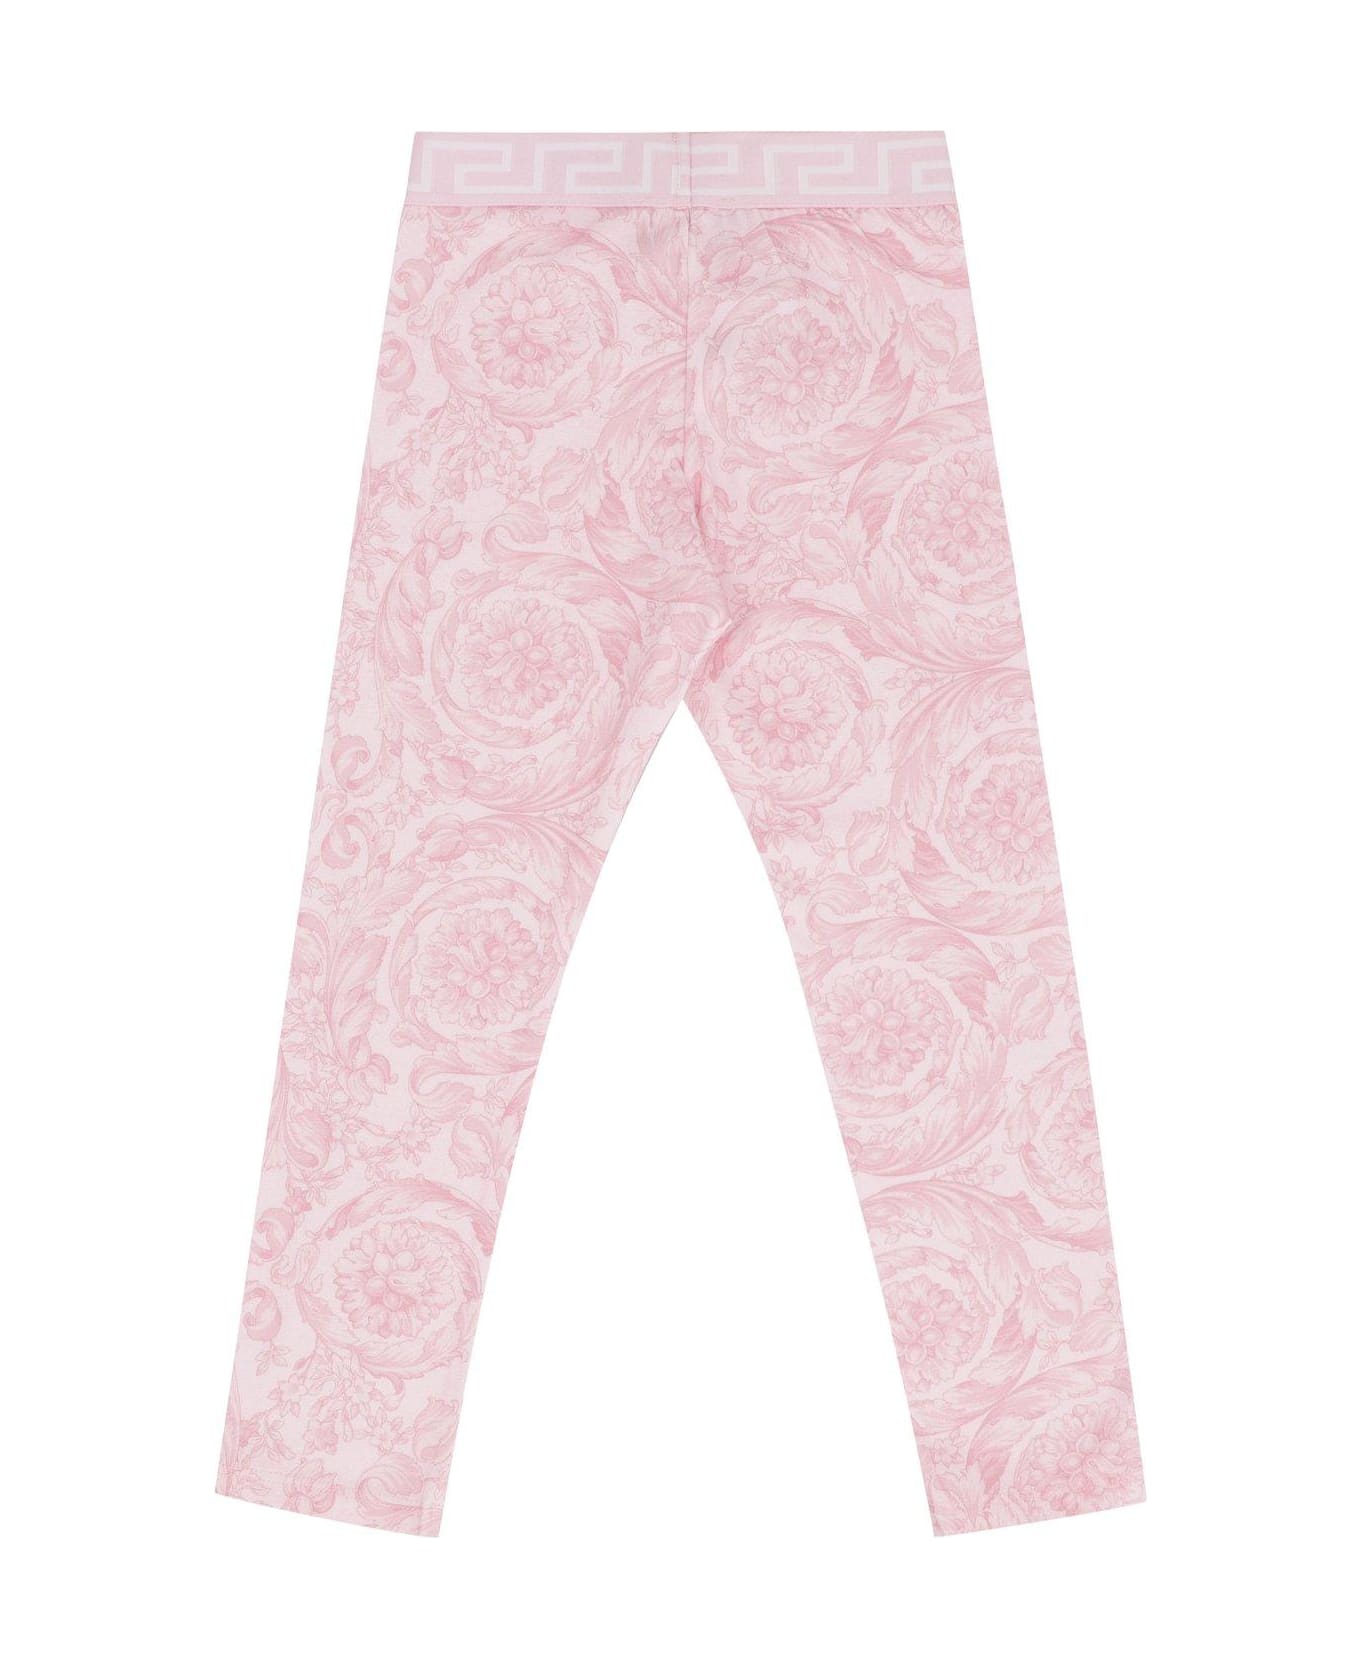 Versace Barocco-printed Stretched Leggings - Rosa ボトムス